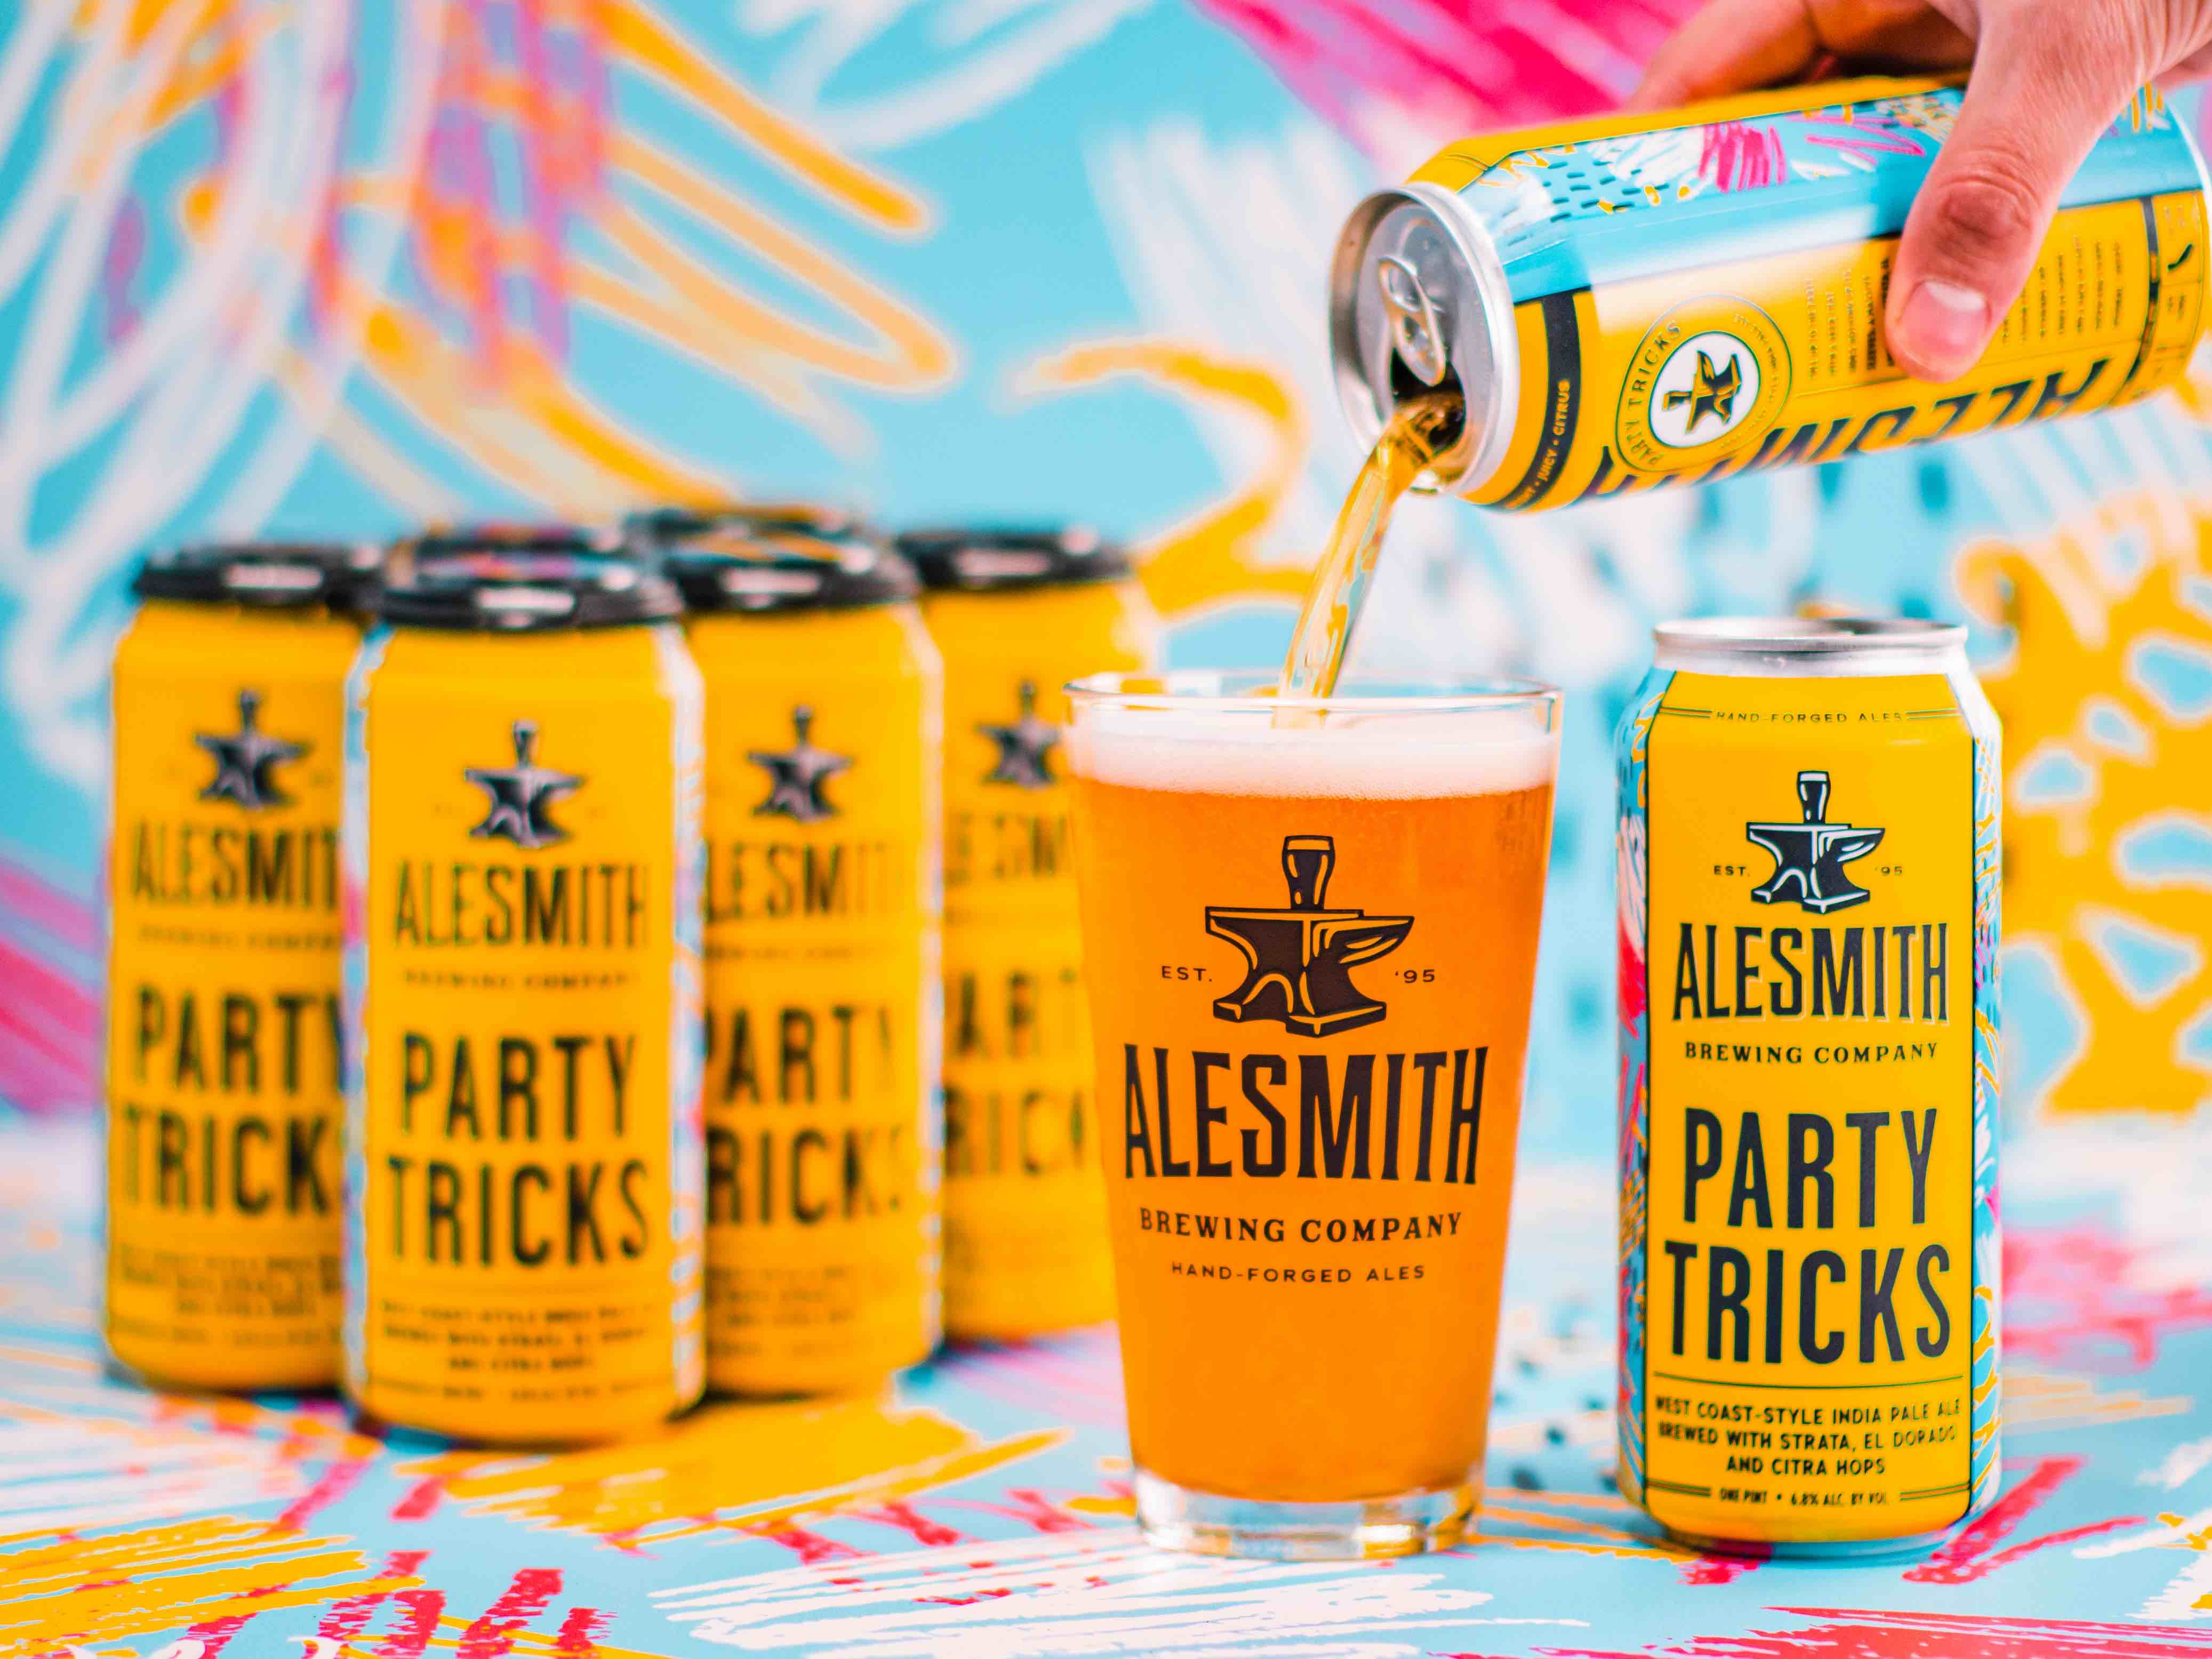 image of Party Tricks West Coast IPA courtesy of AleSmith Brewing Co.